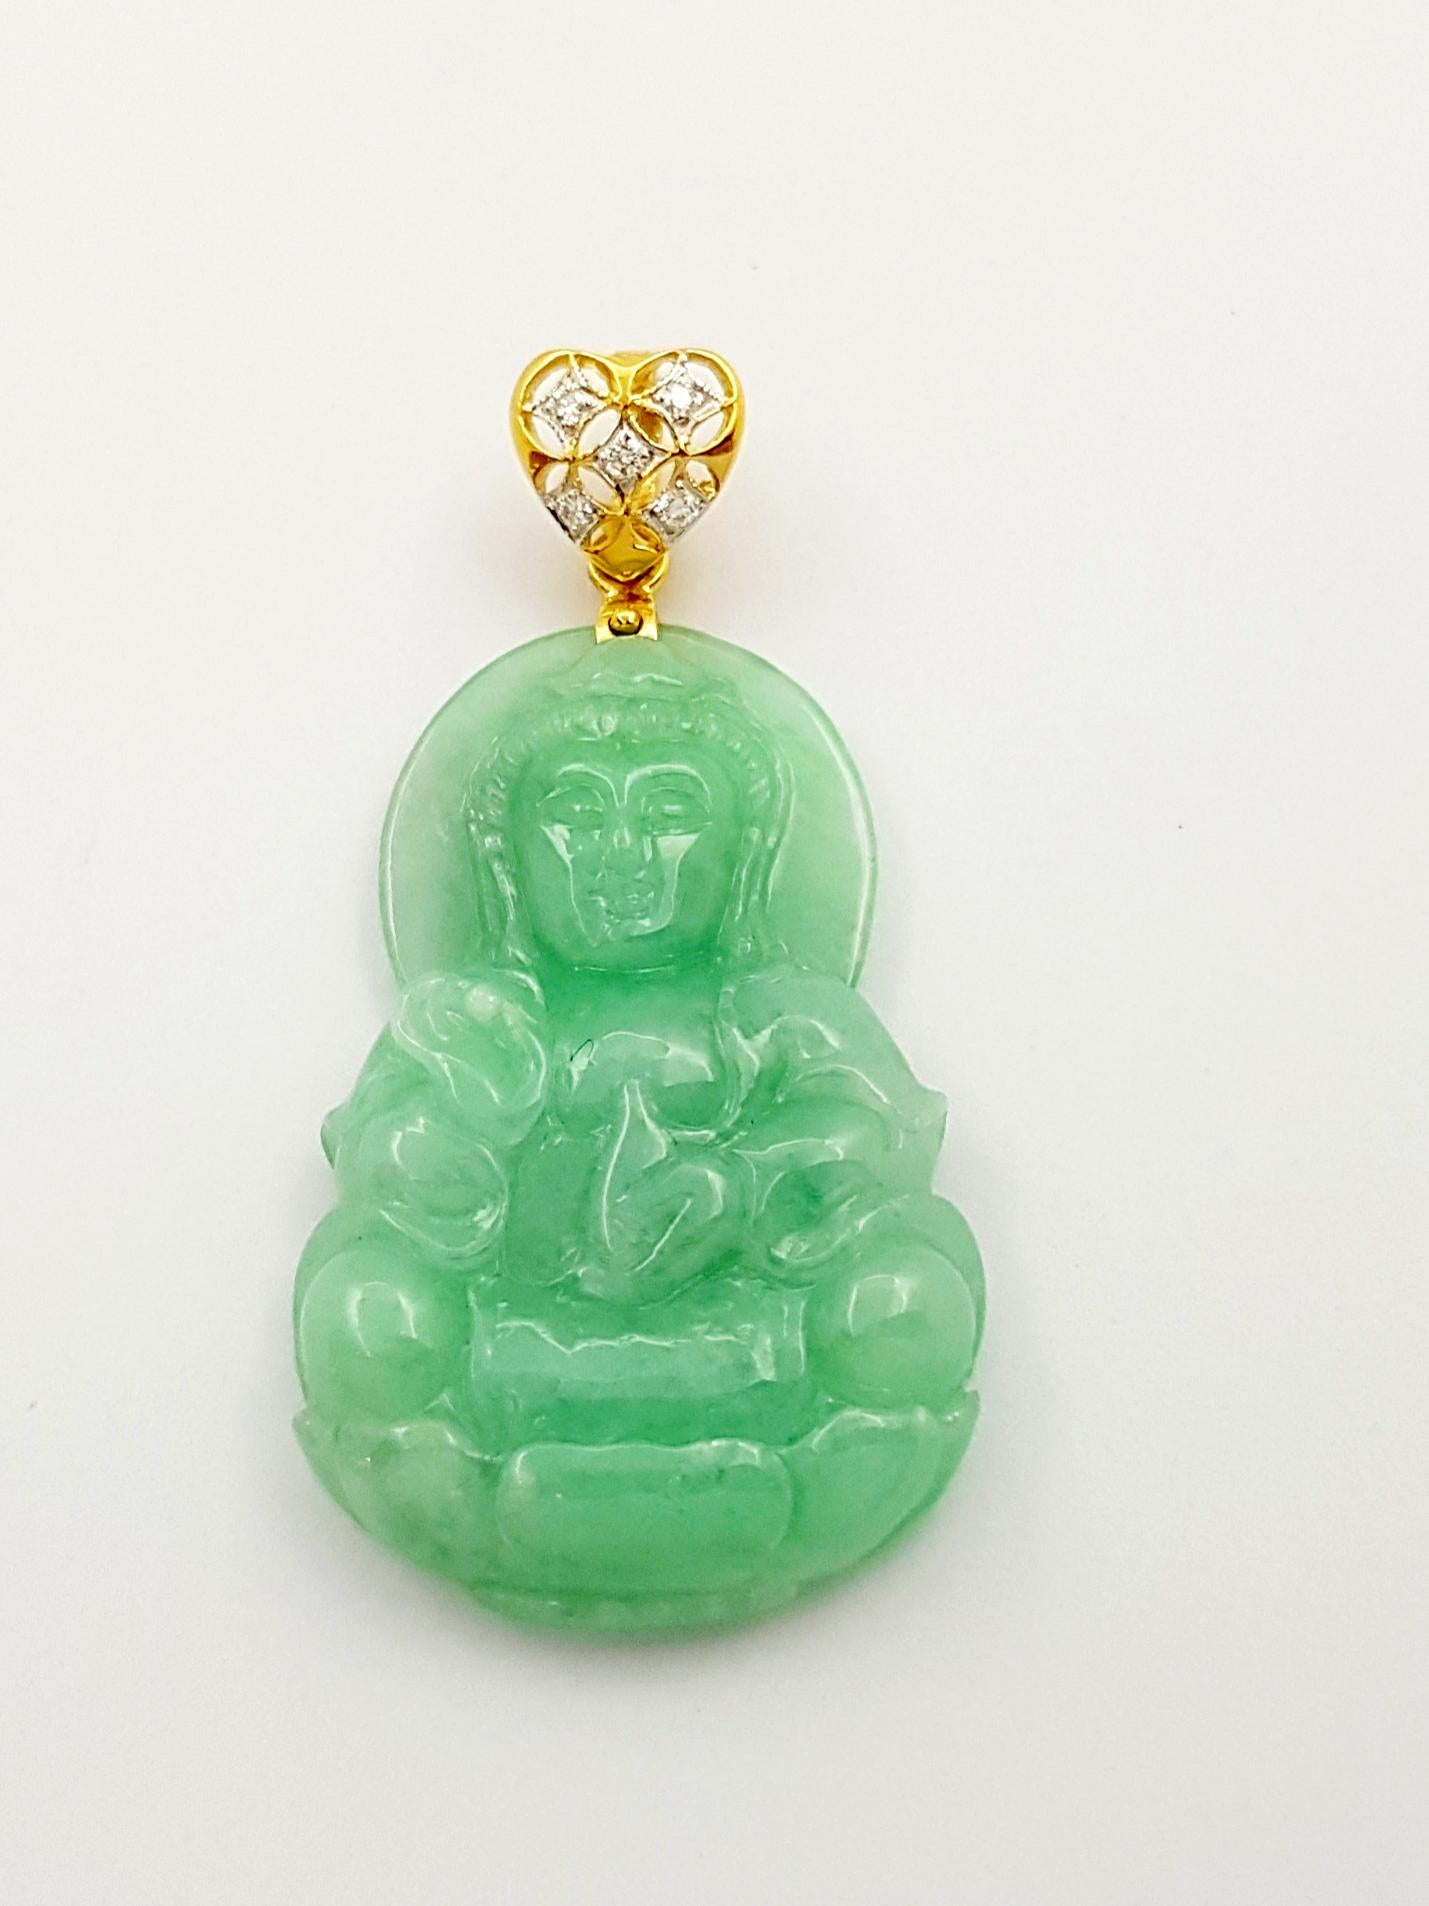 Jade with Diamond 0.03 carat Pendant set in 18K Gold Settings
(chain not included)

Width: 2.5 cm 
Length: 4.9 cm
Total Weight: 11.49 grams

